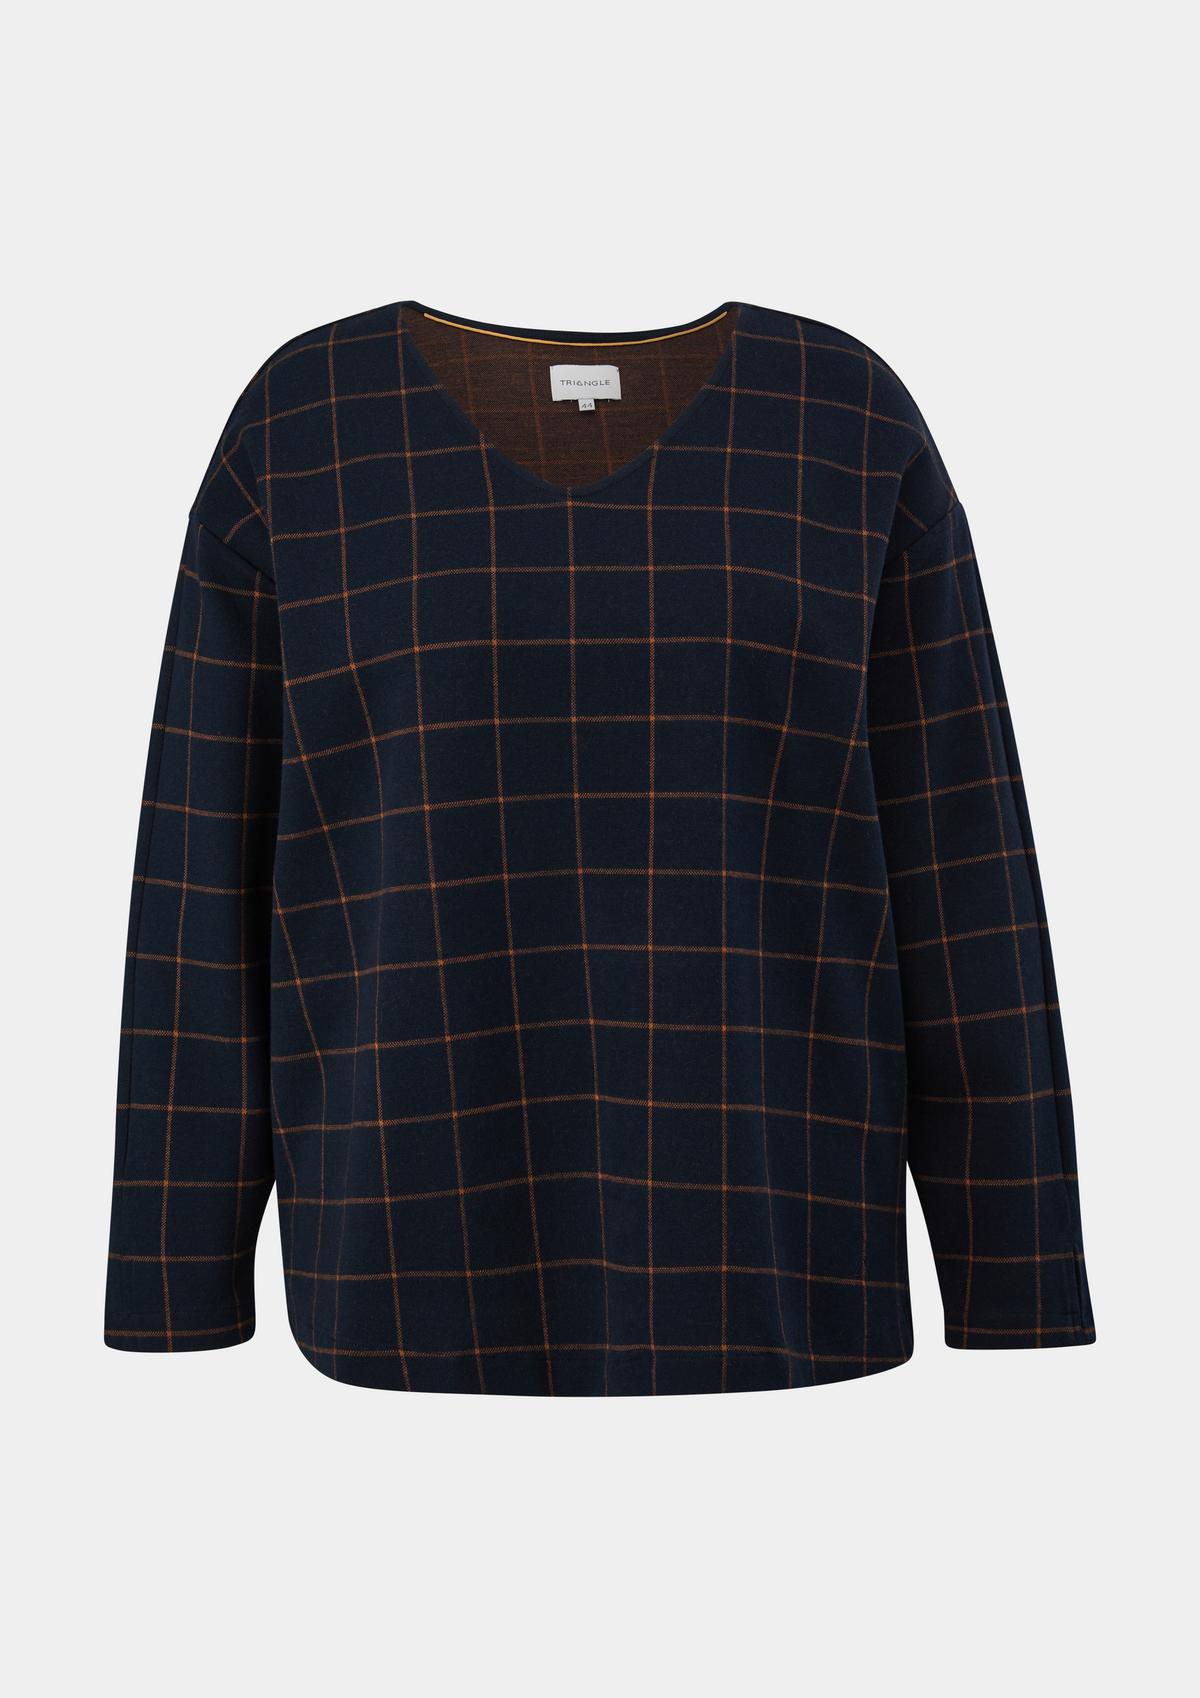 s.Oliver Sweatshirt with a knitted pattern